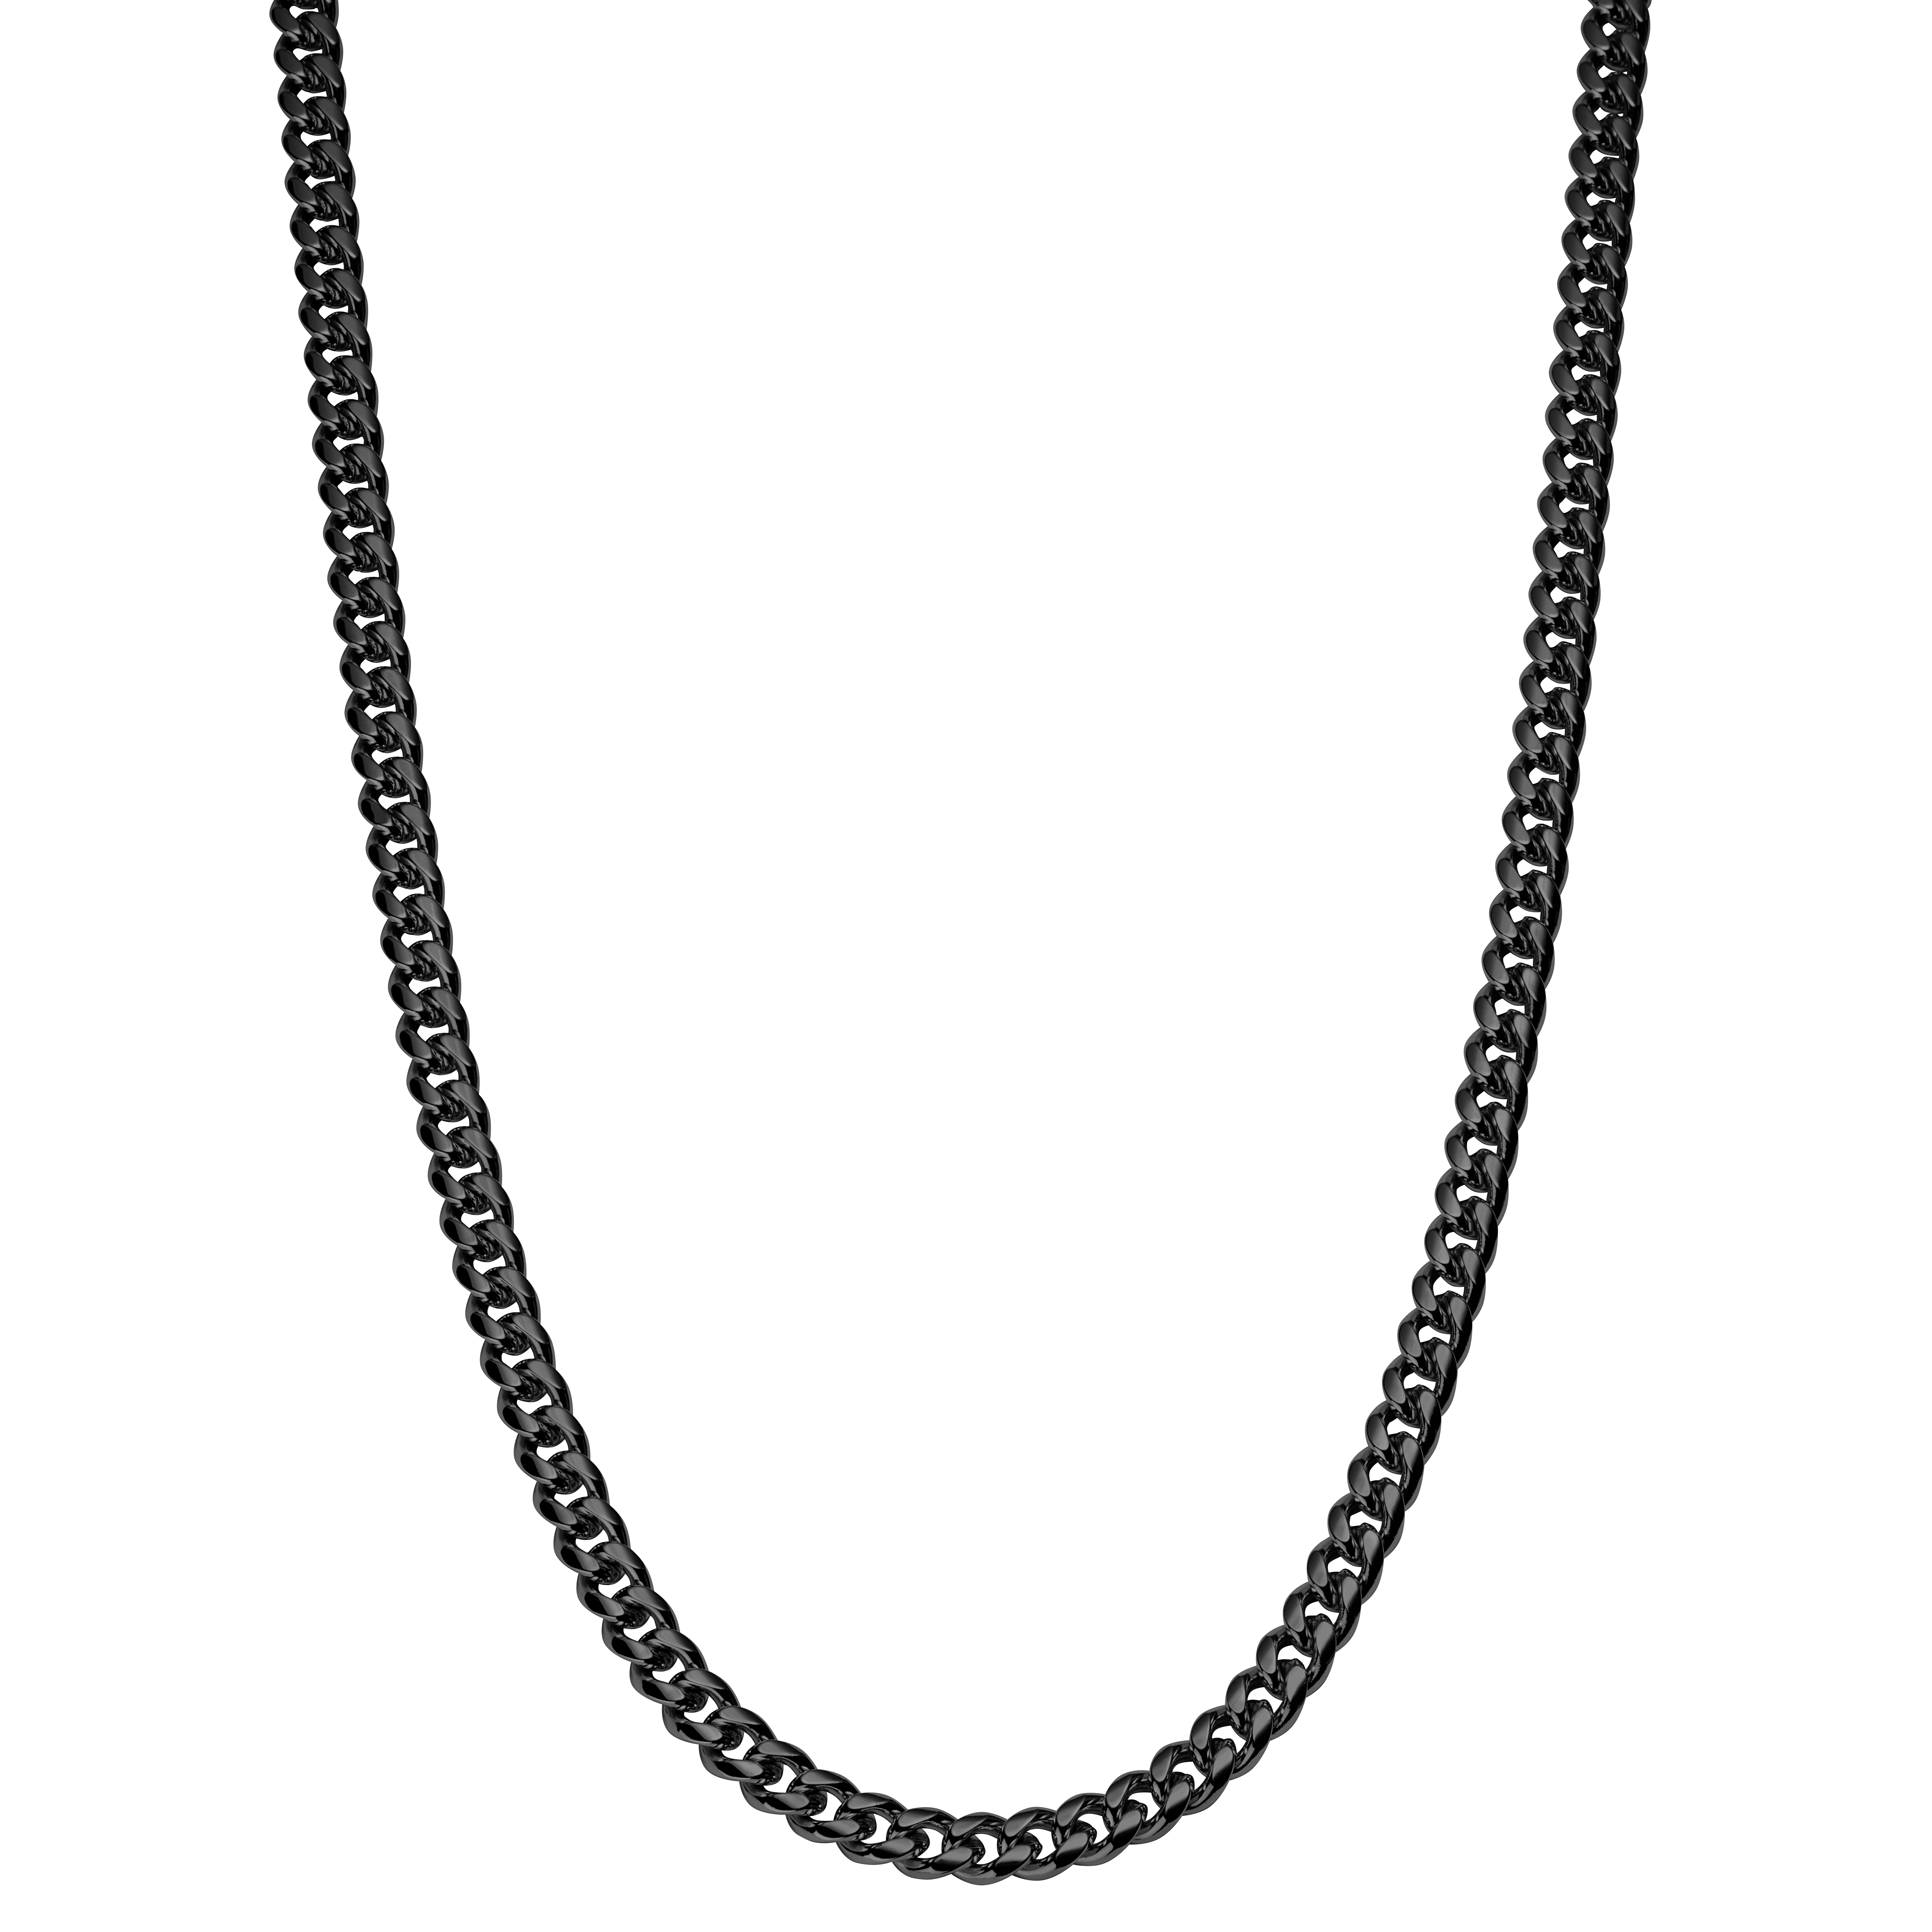 SMILEST Layered Rope Chain Necklace for Men 18K Gold Silver Black Stainless  Steel Rope Chain Necklace for Men Women Boy Girls Jewelry Gifts -  Walmart.com